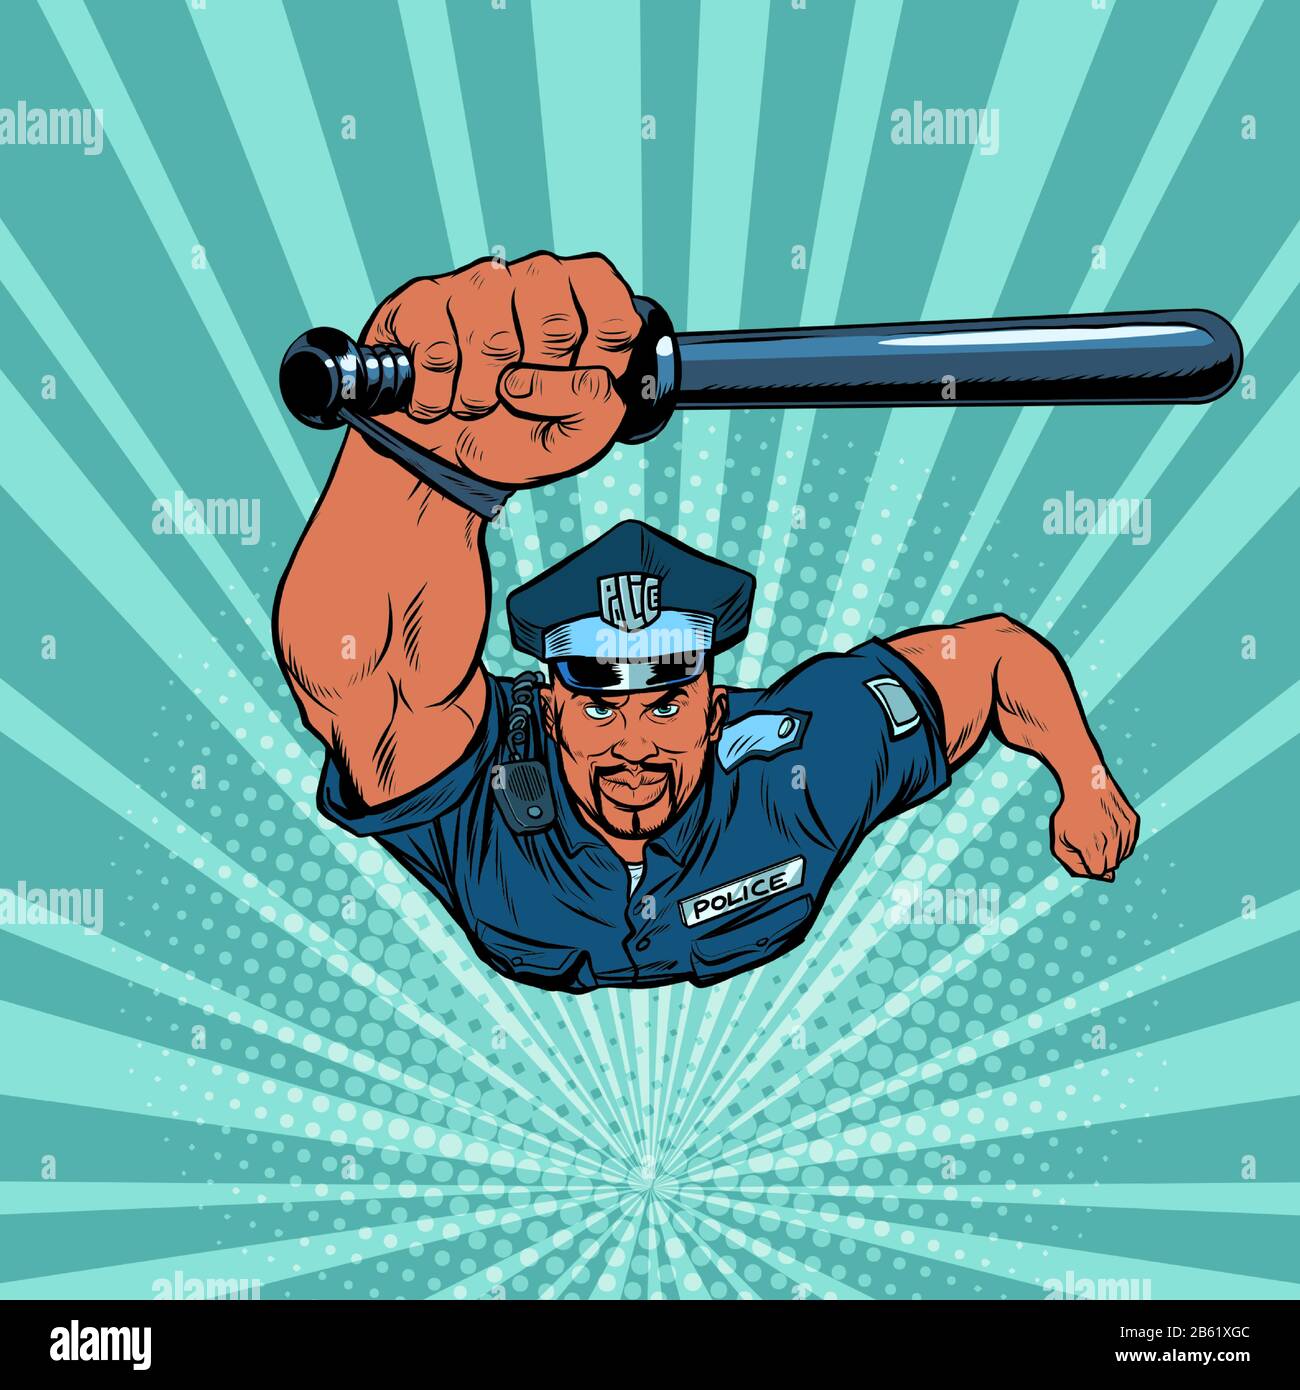 African Police officer with a baton Stock Vector